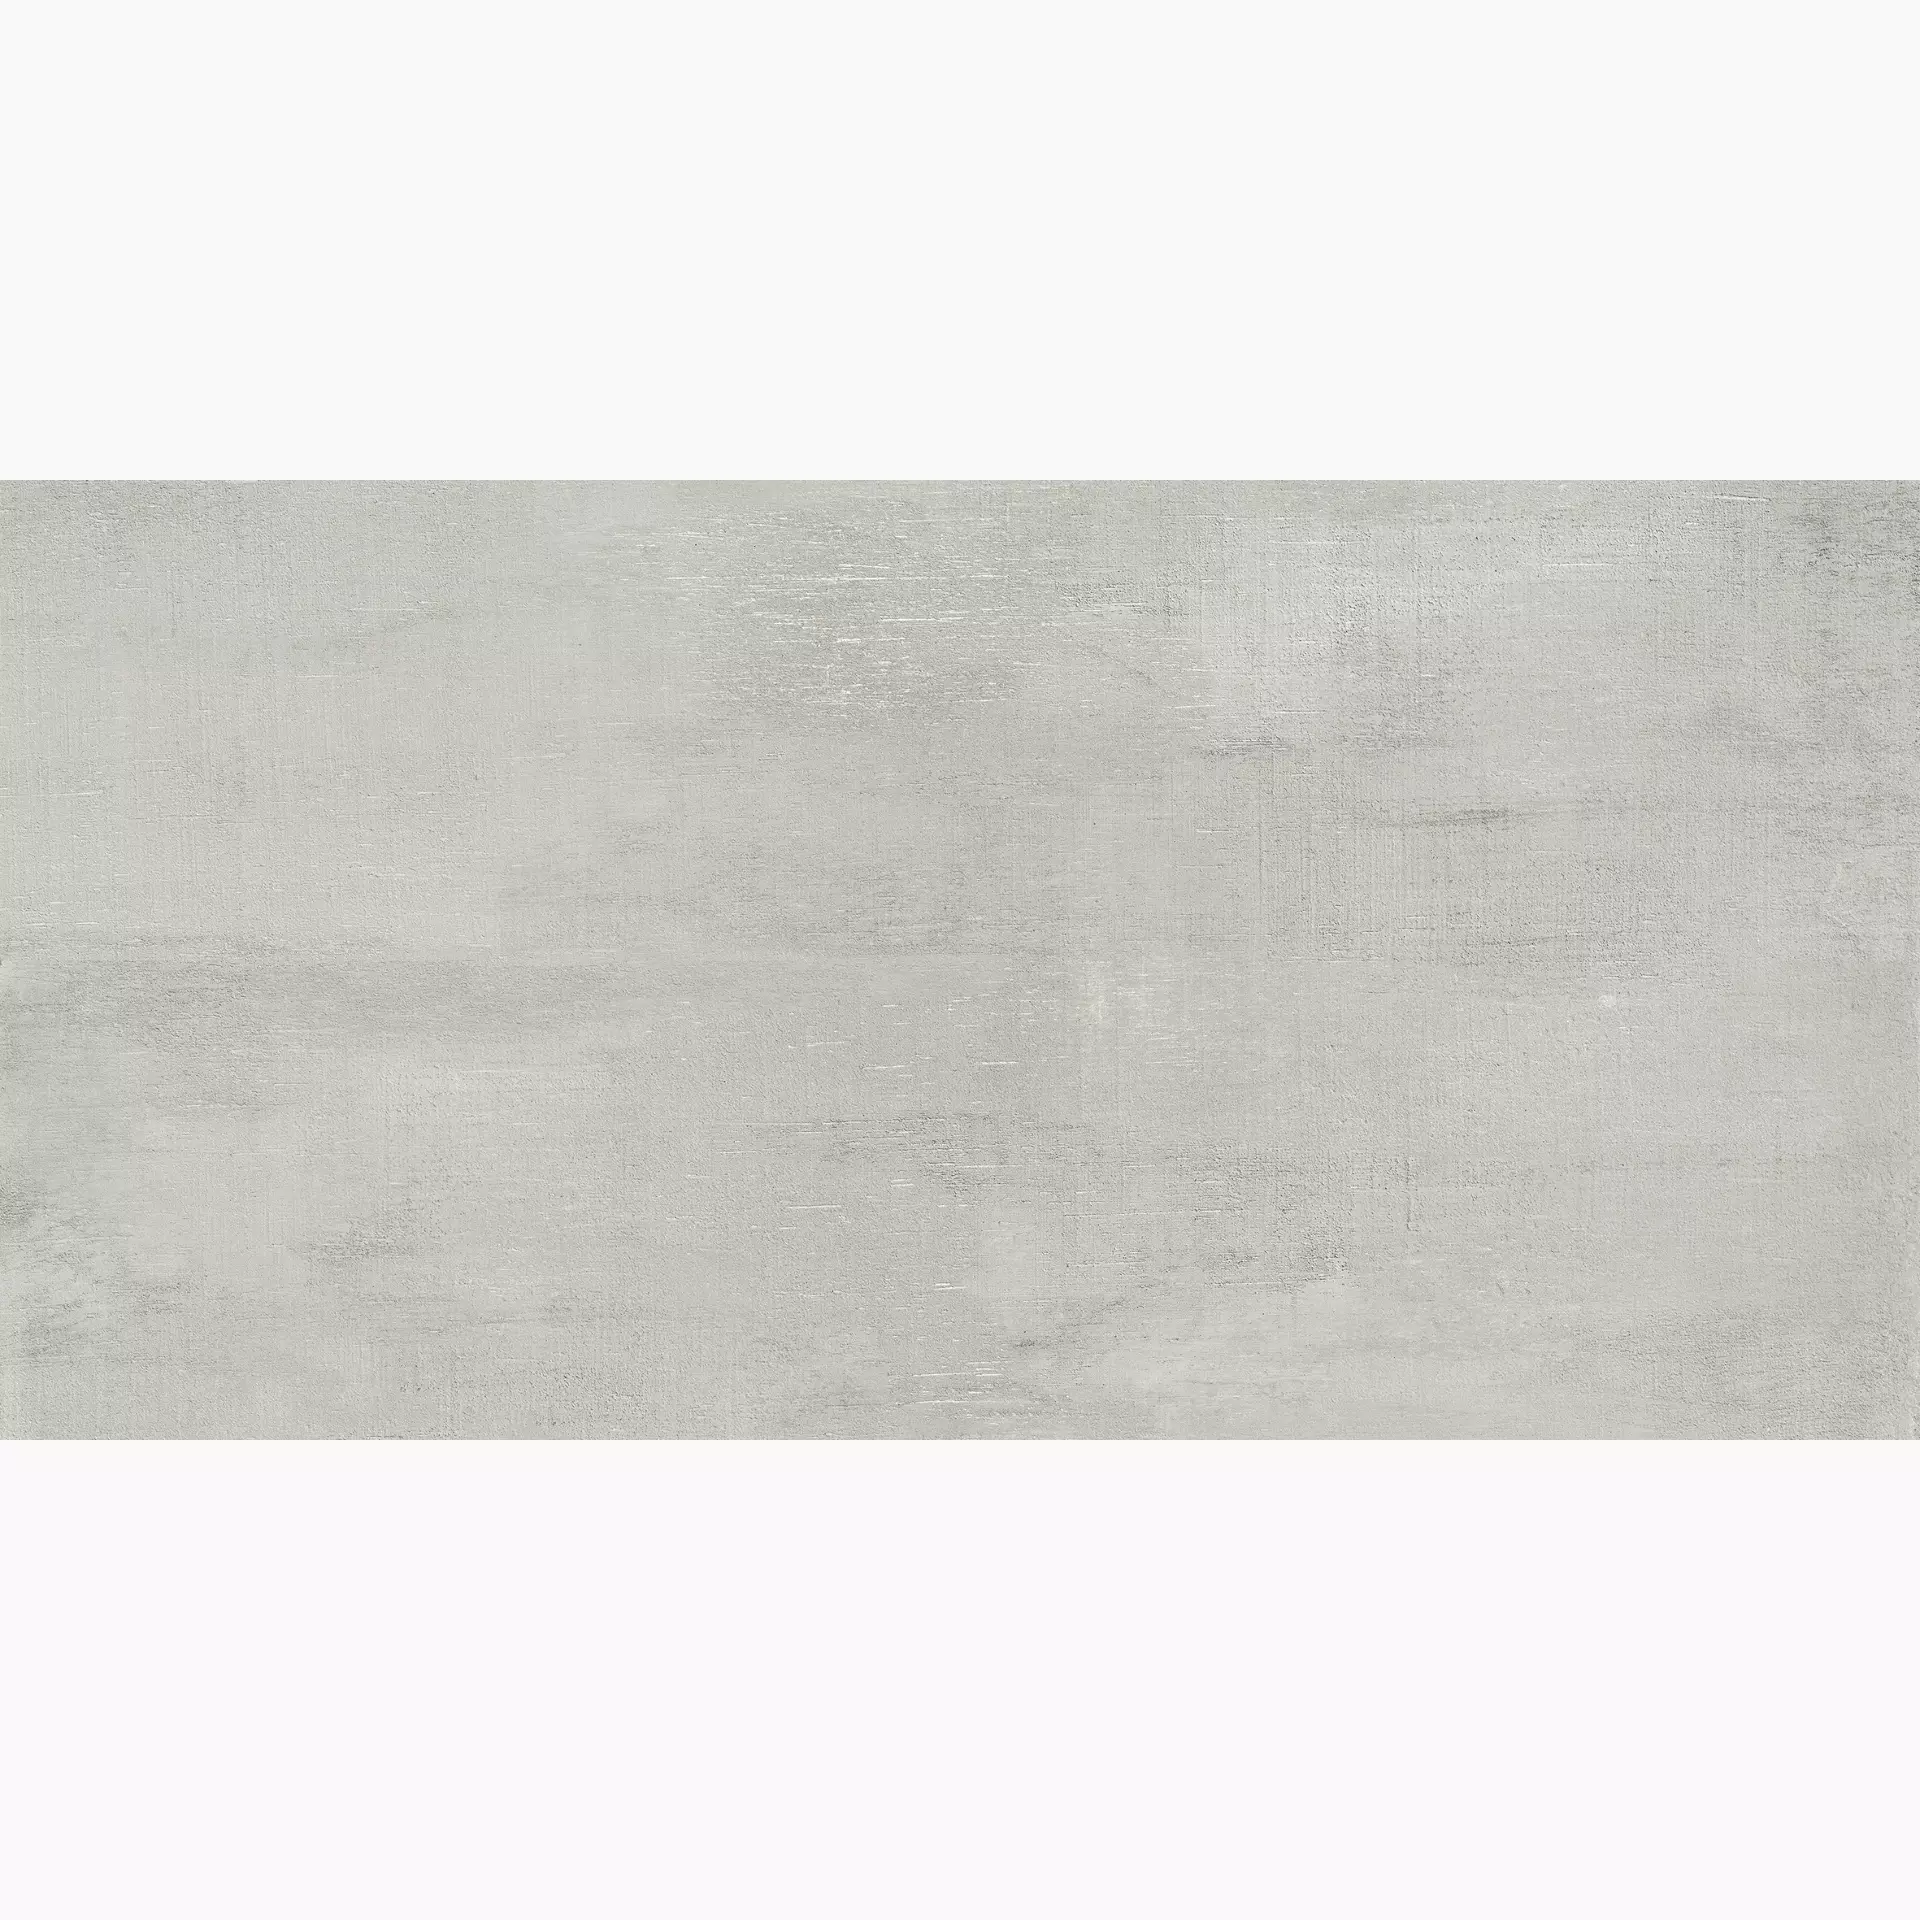 MGM Industrial Grey INDUGRE12036 60x120cm rectified 10mm